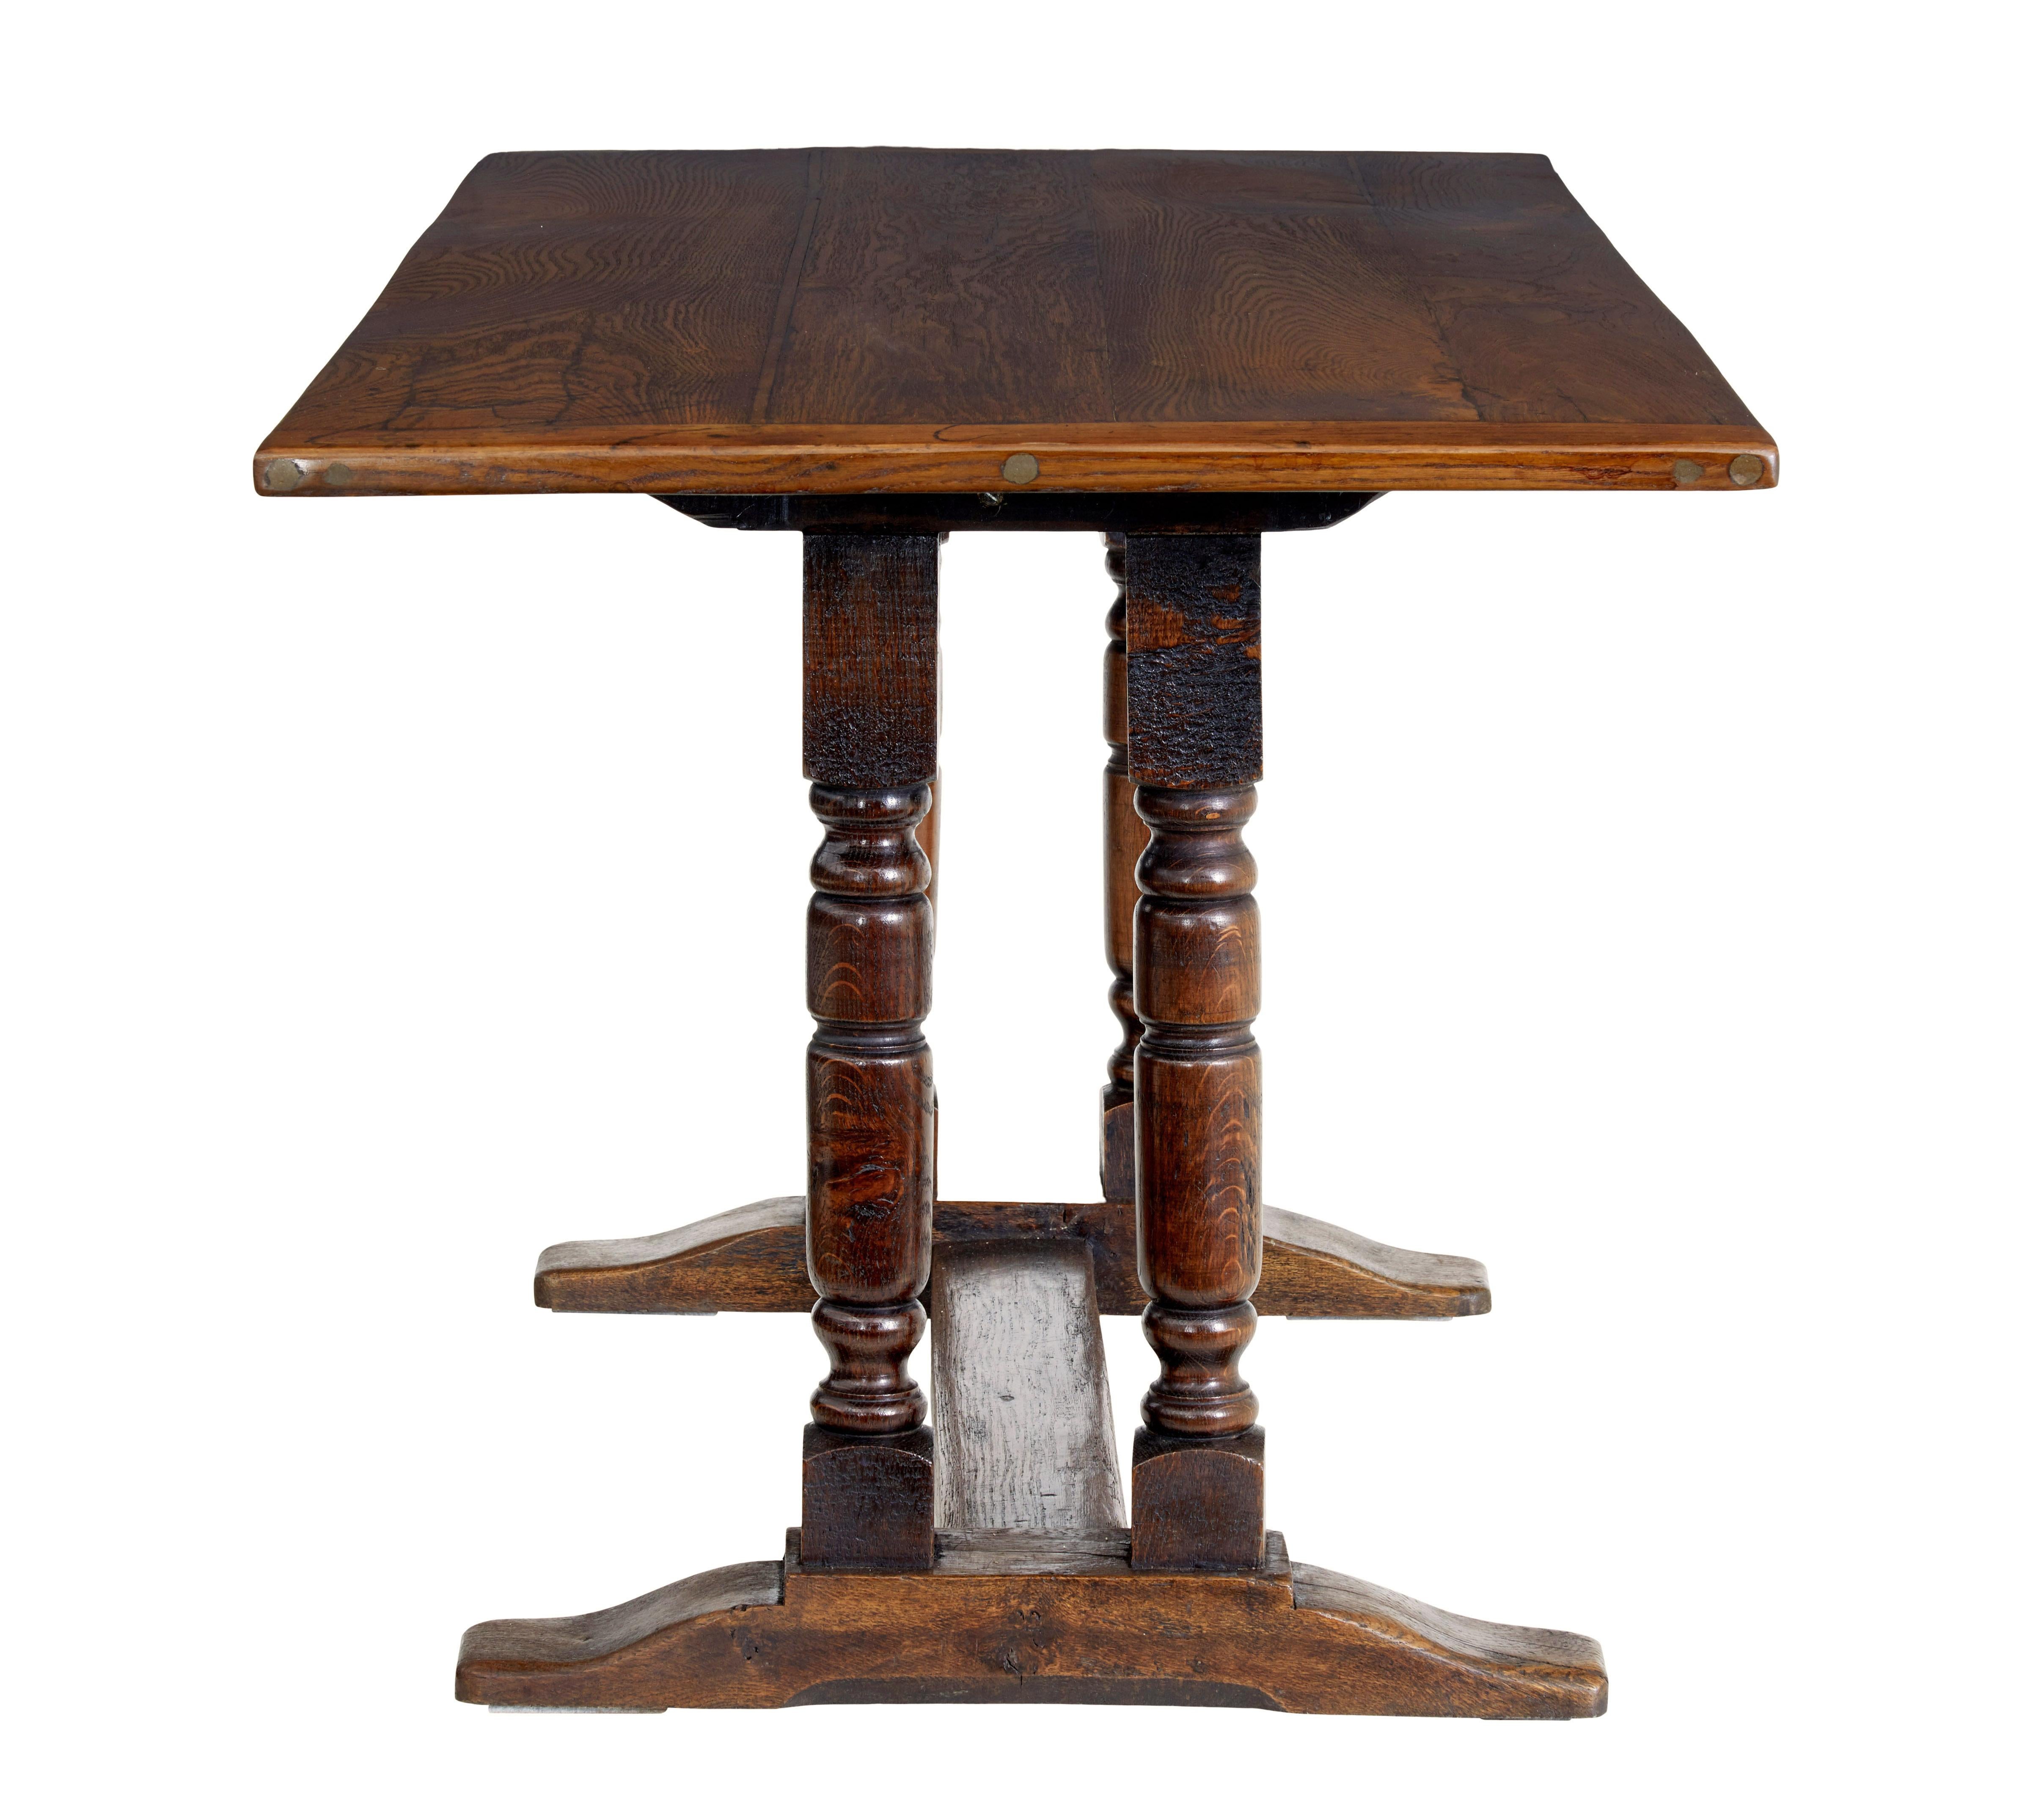 Hand-Crafted Rustic 19th Century oak dining table